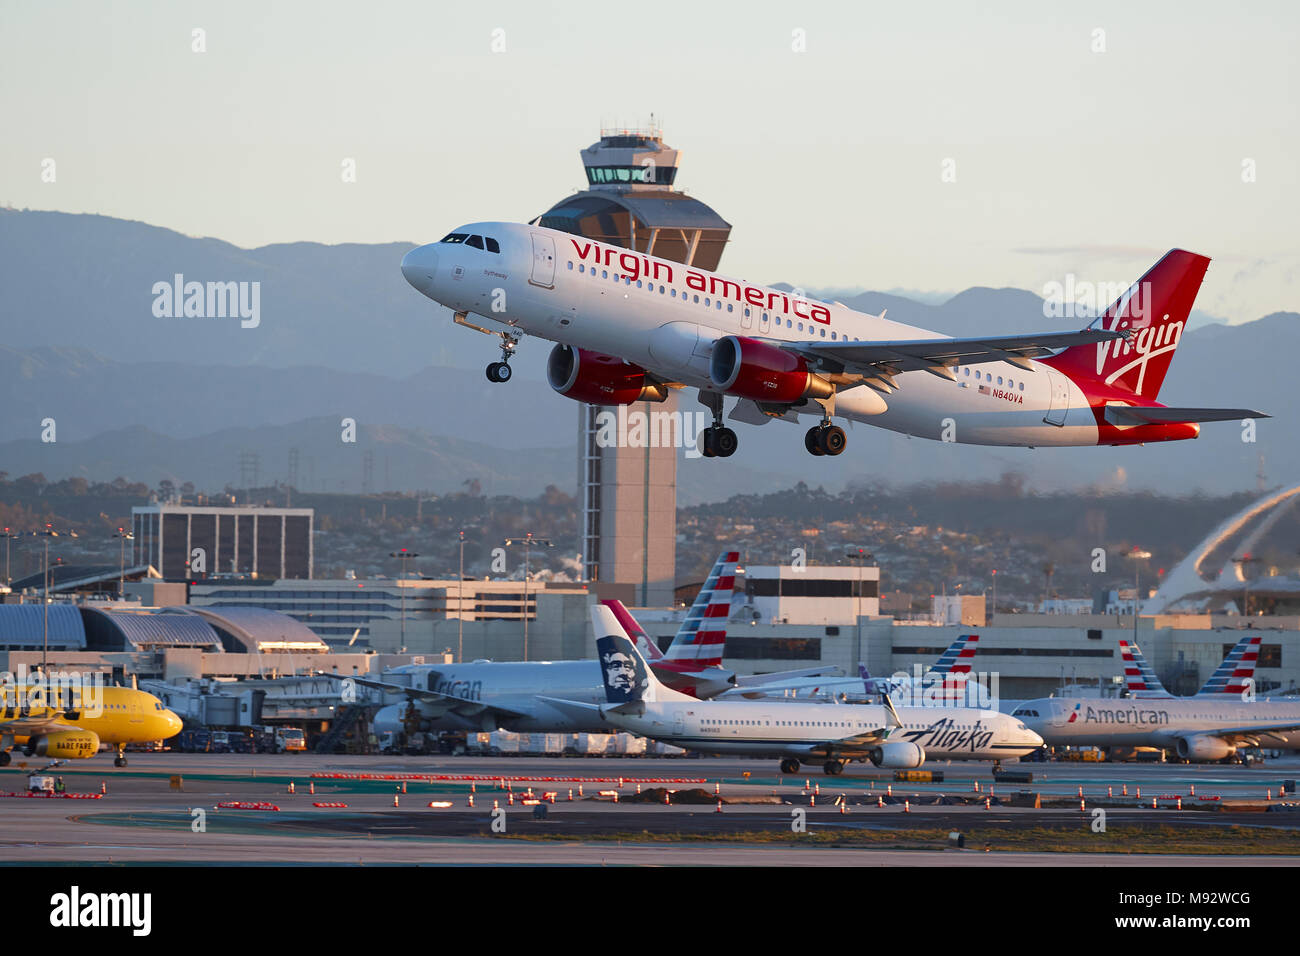 Virgin America Airlines Airbus A320 Taking Off From Los Angeles International Airport, LAX, After Sunrise. The Control Tower In Background. Stock Photo